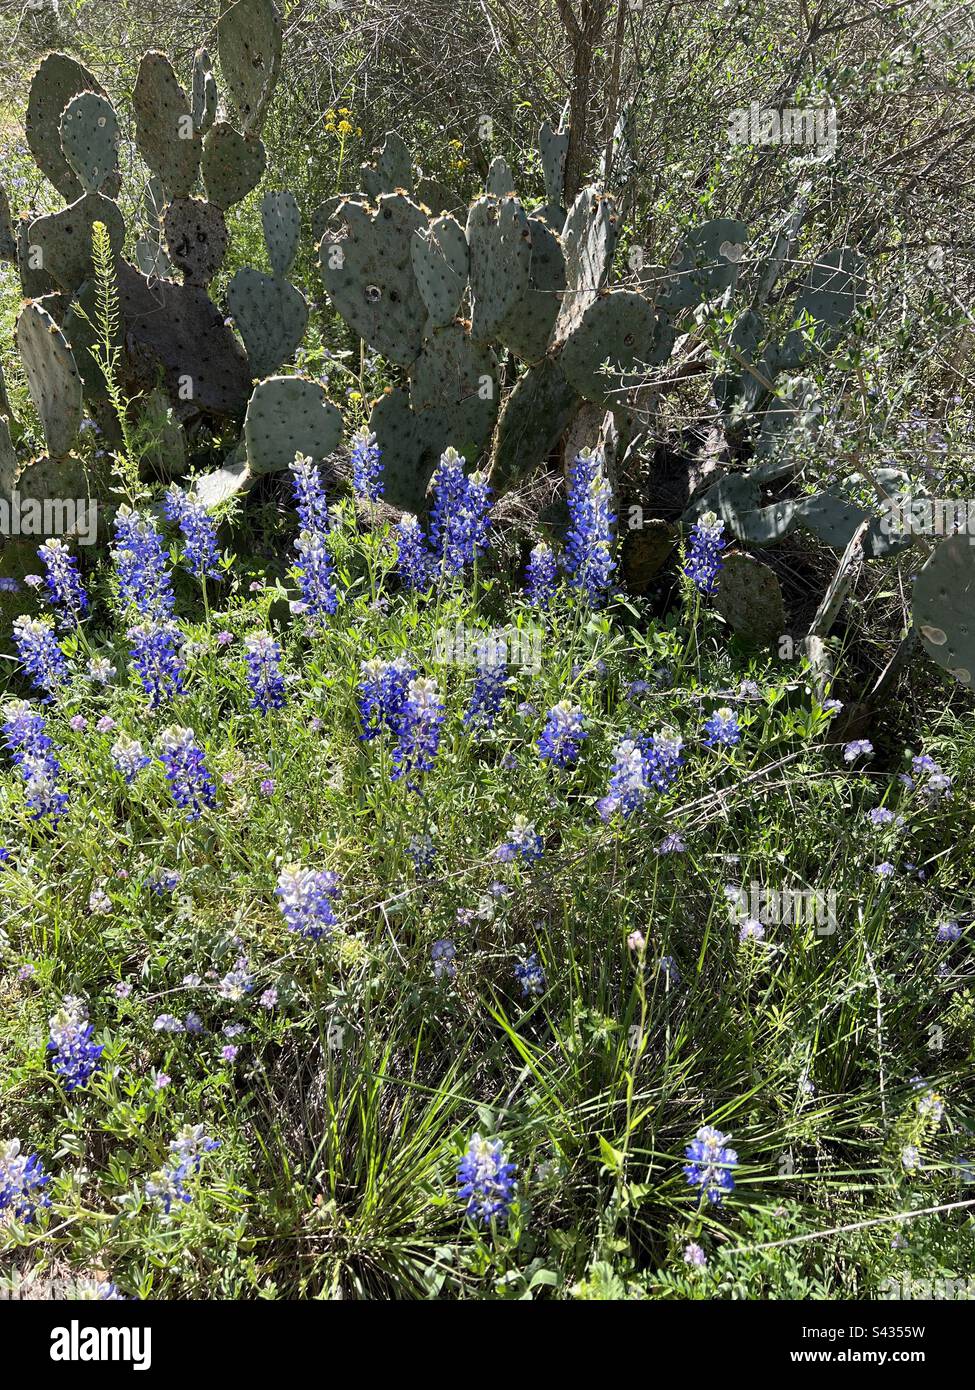 Texas Bluebonnets with prickly pear cactus in the background Stock Photo